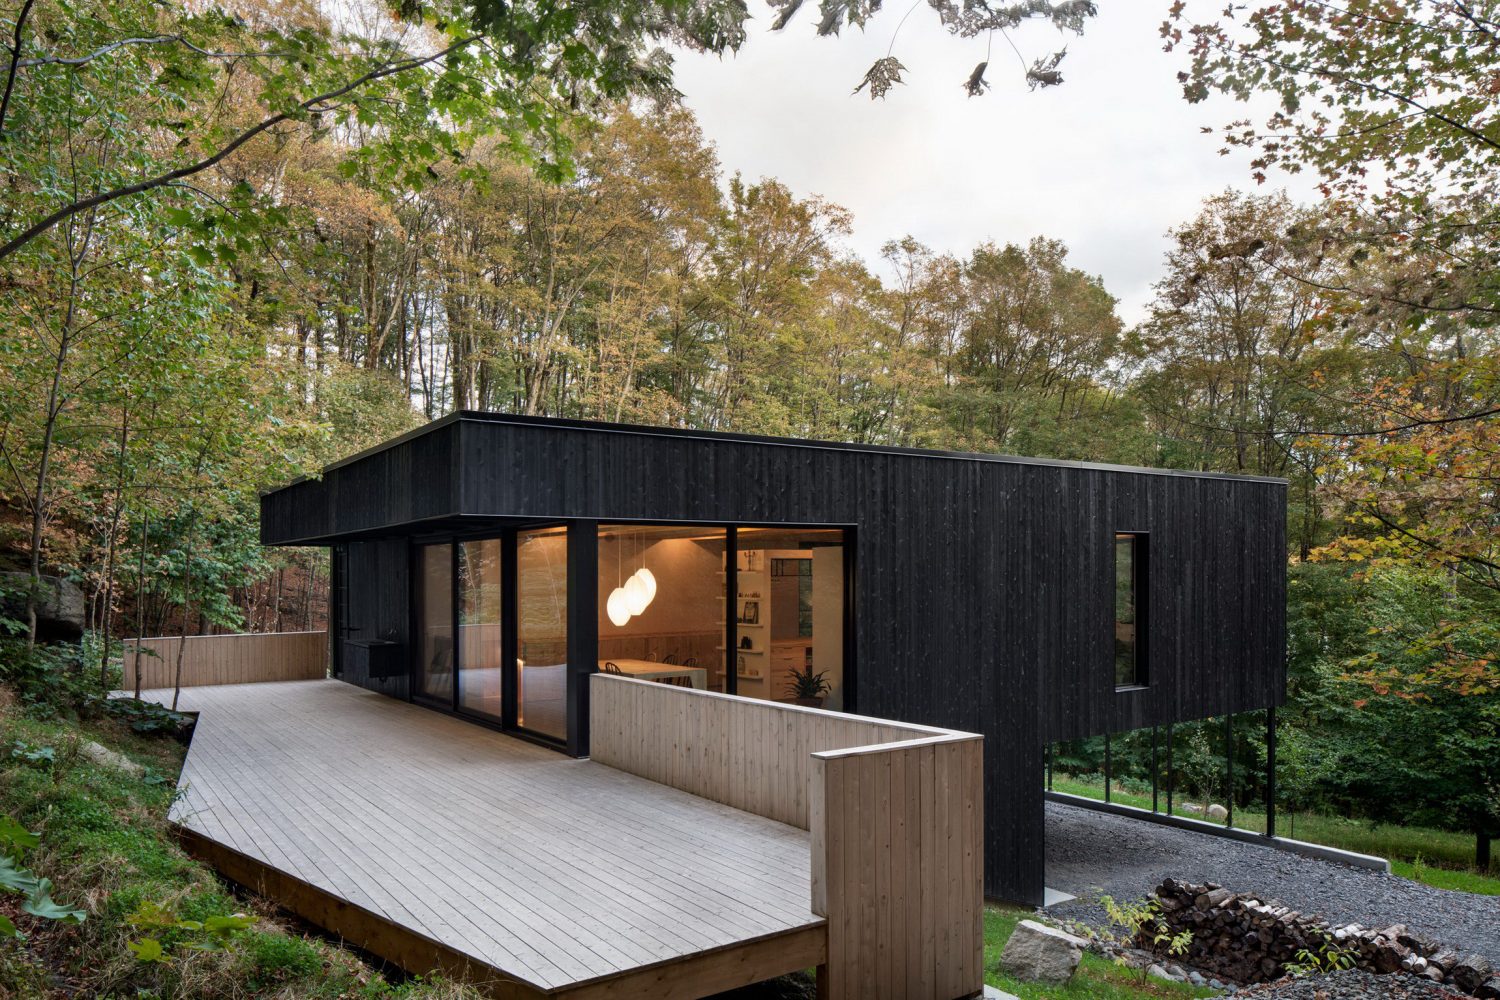 The Rock | Black Residence on a Hillside by Atelier General Architecture